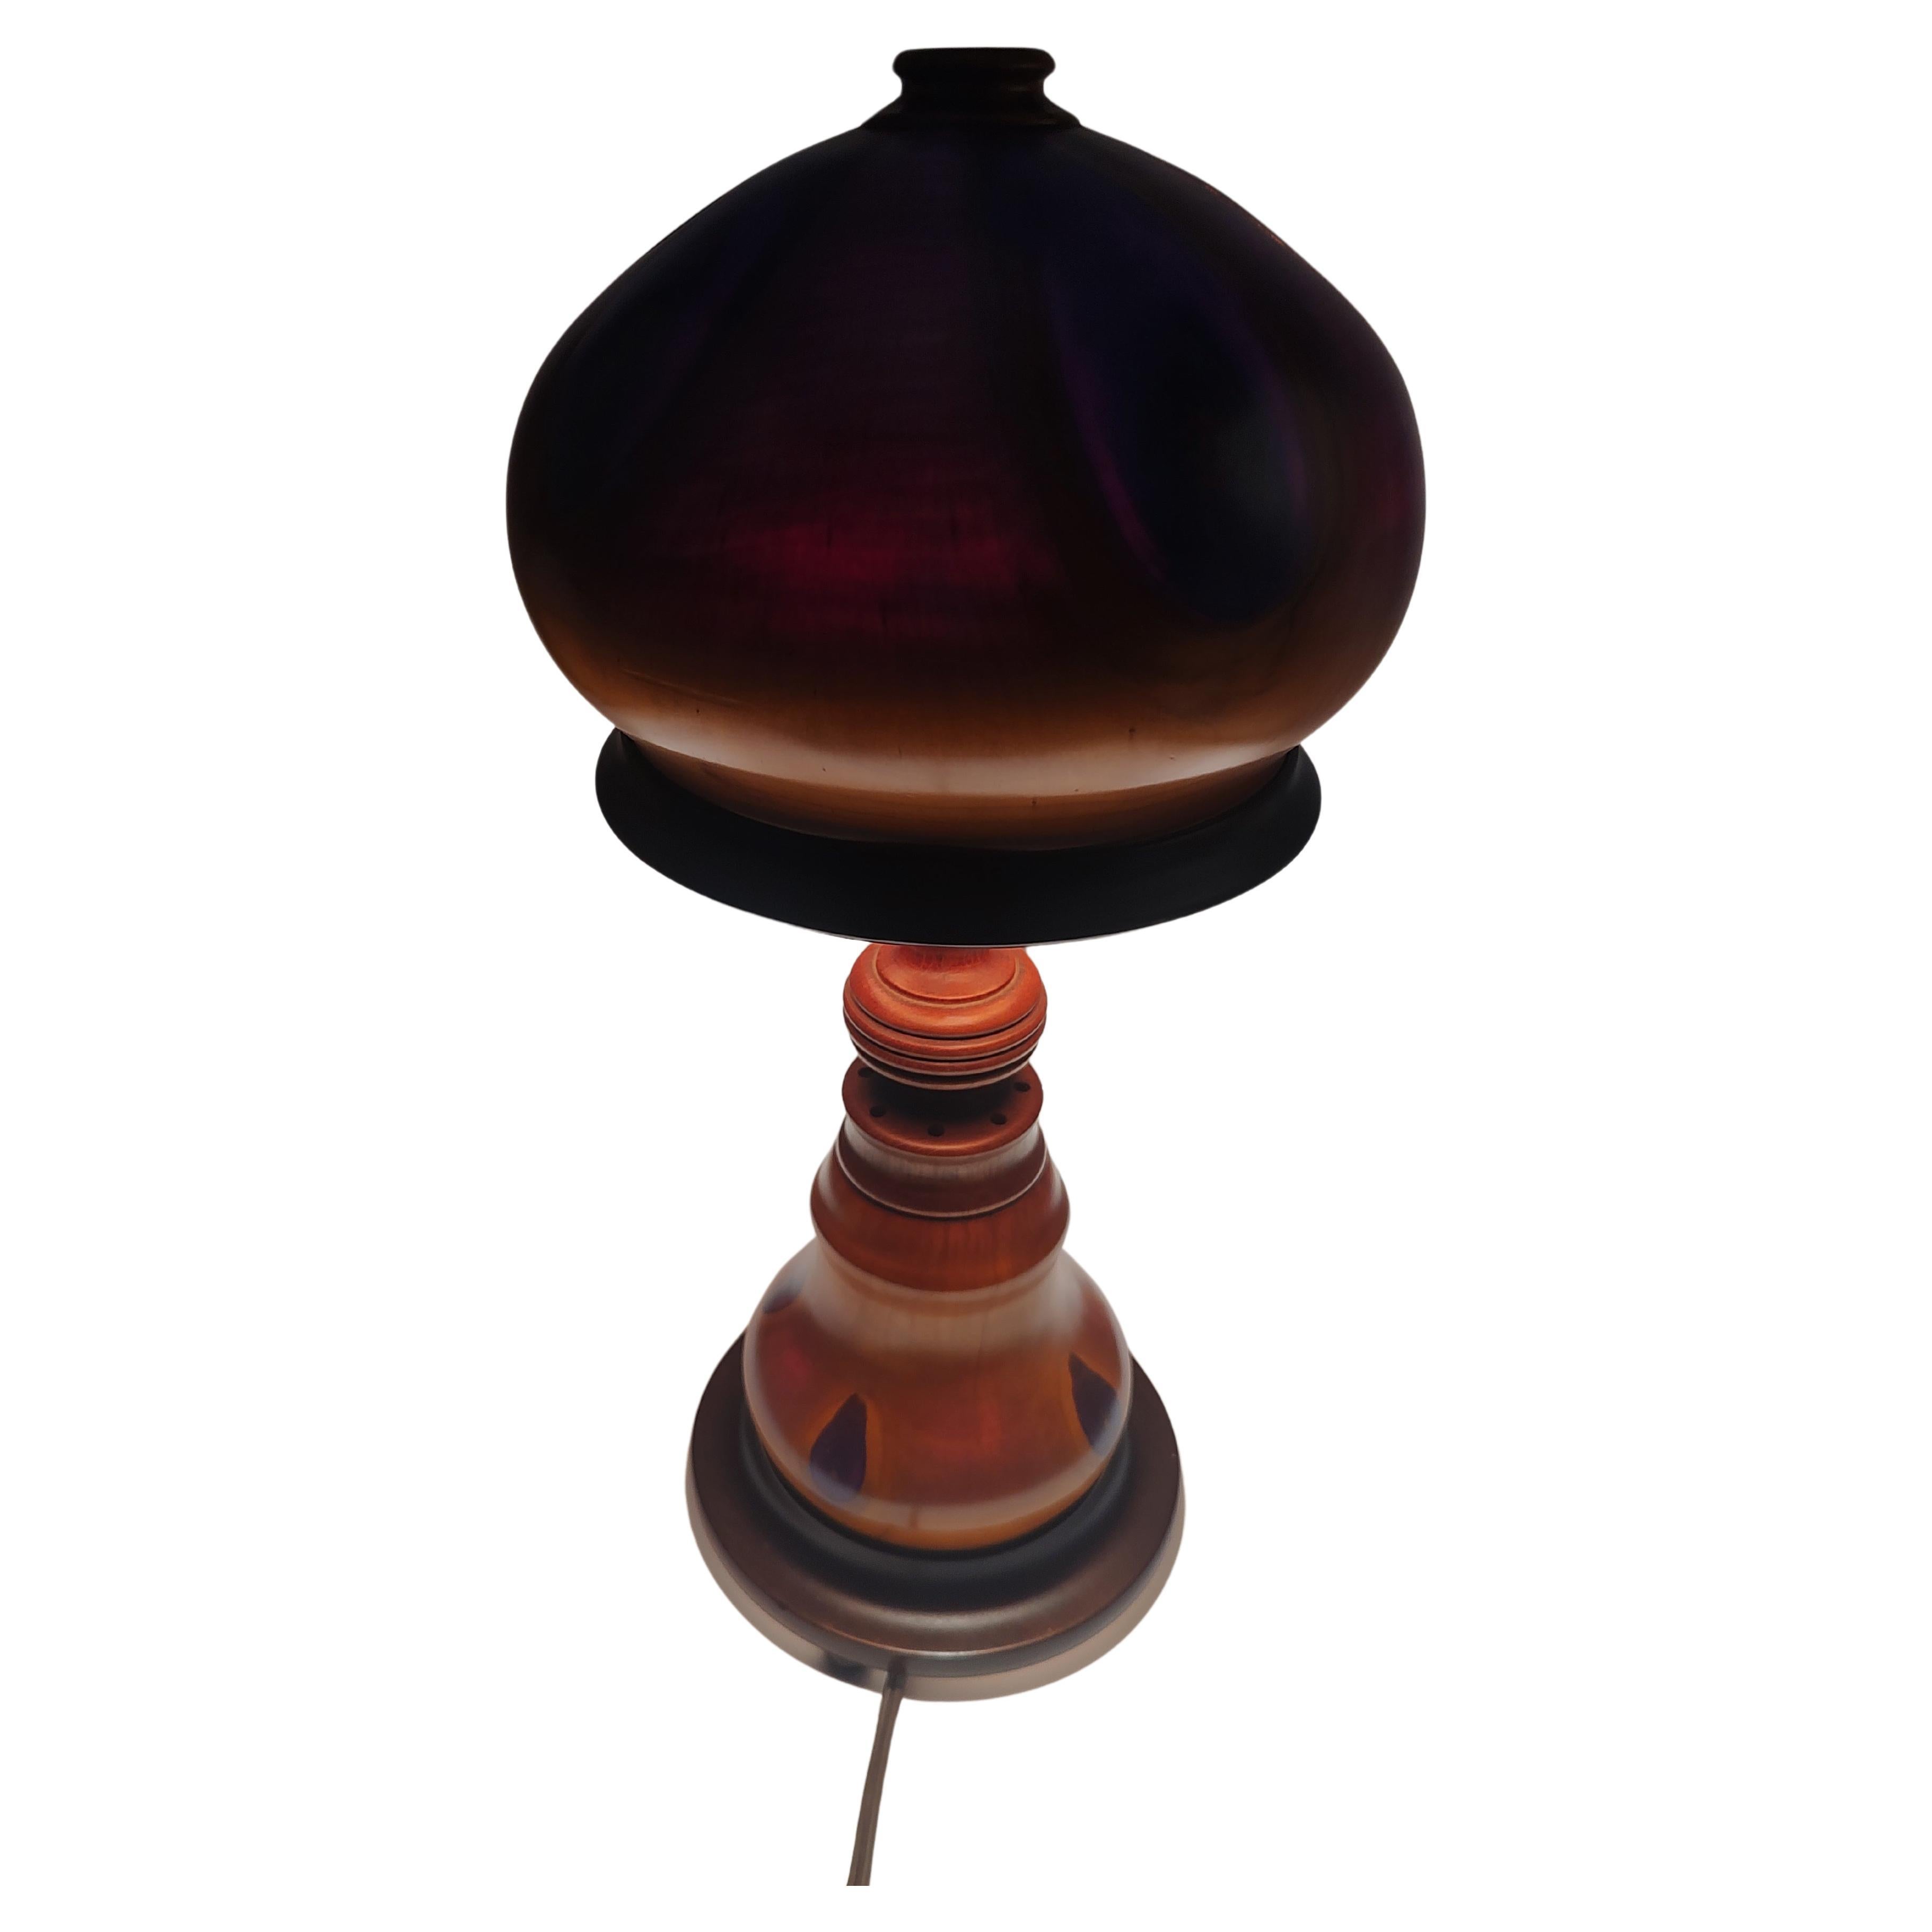 Fabulous hand carved exotic all wood (bese & shade) table lamp from Austrian art Deco era. Shade and base both light up and create a violet blue red rainbow with the hollowed out portions.
Lamp is a beauty when not lit,  but lit up is totally